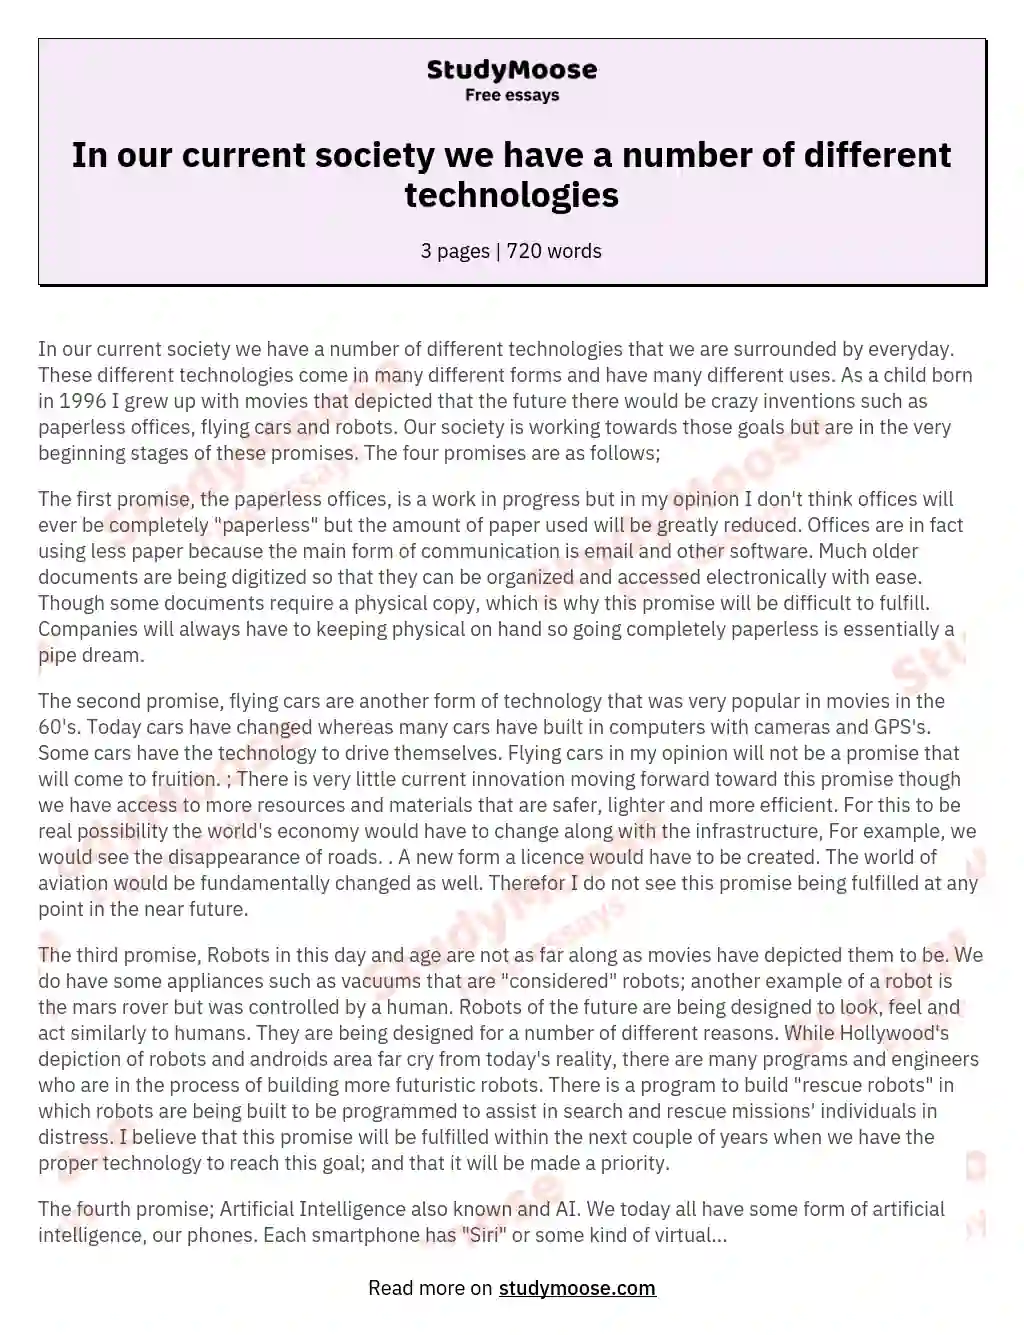 In our current society we have a number of different technologies essay